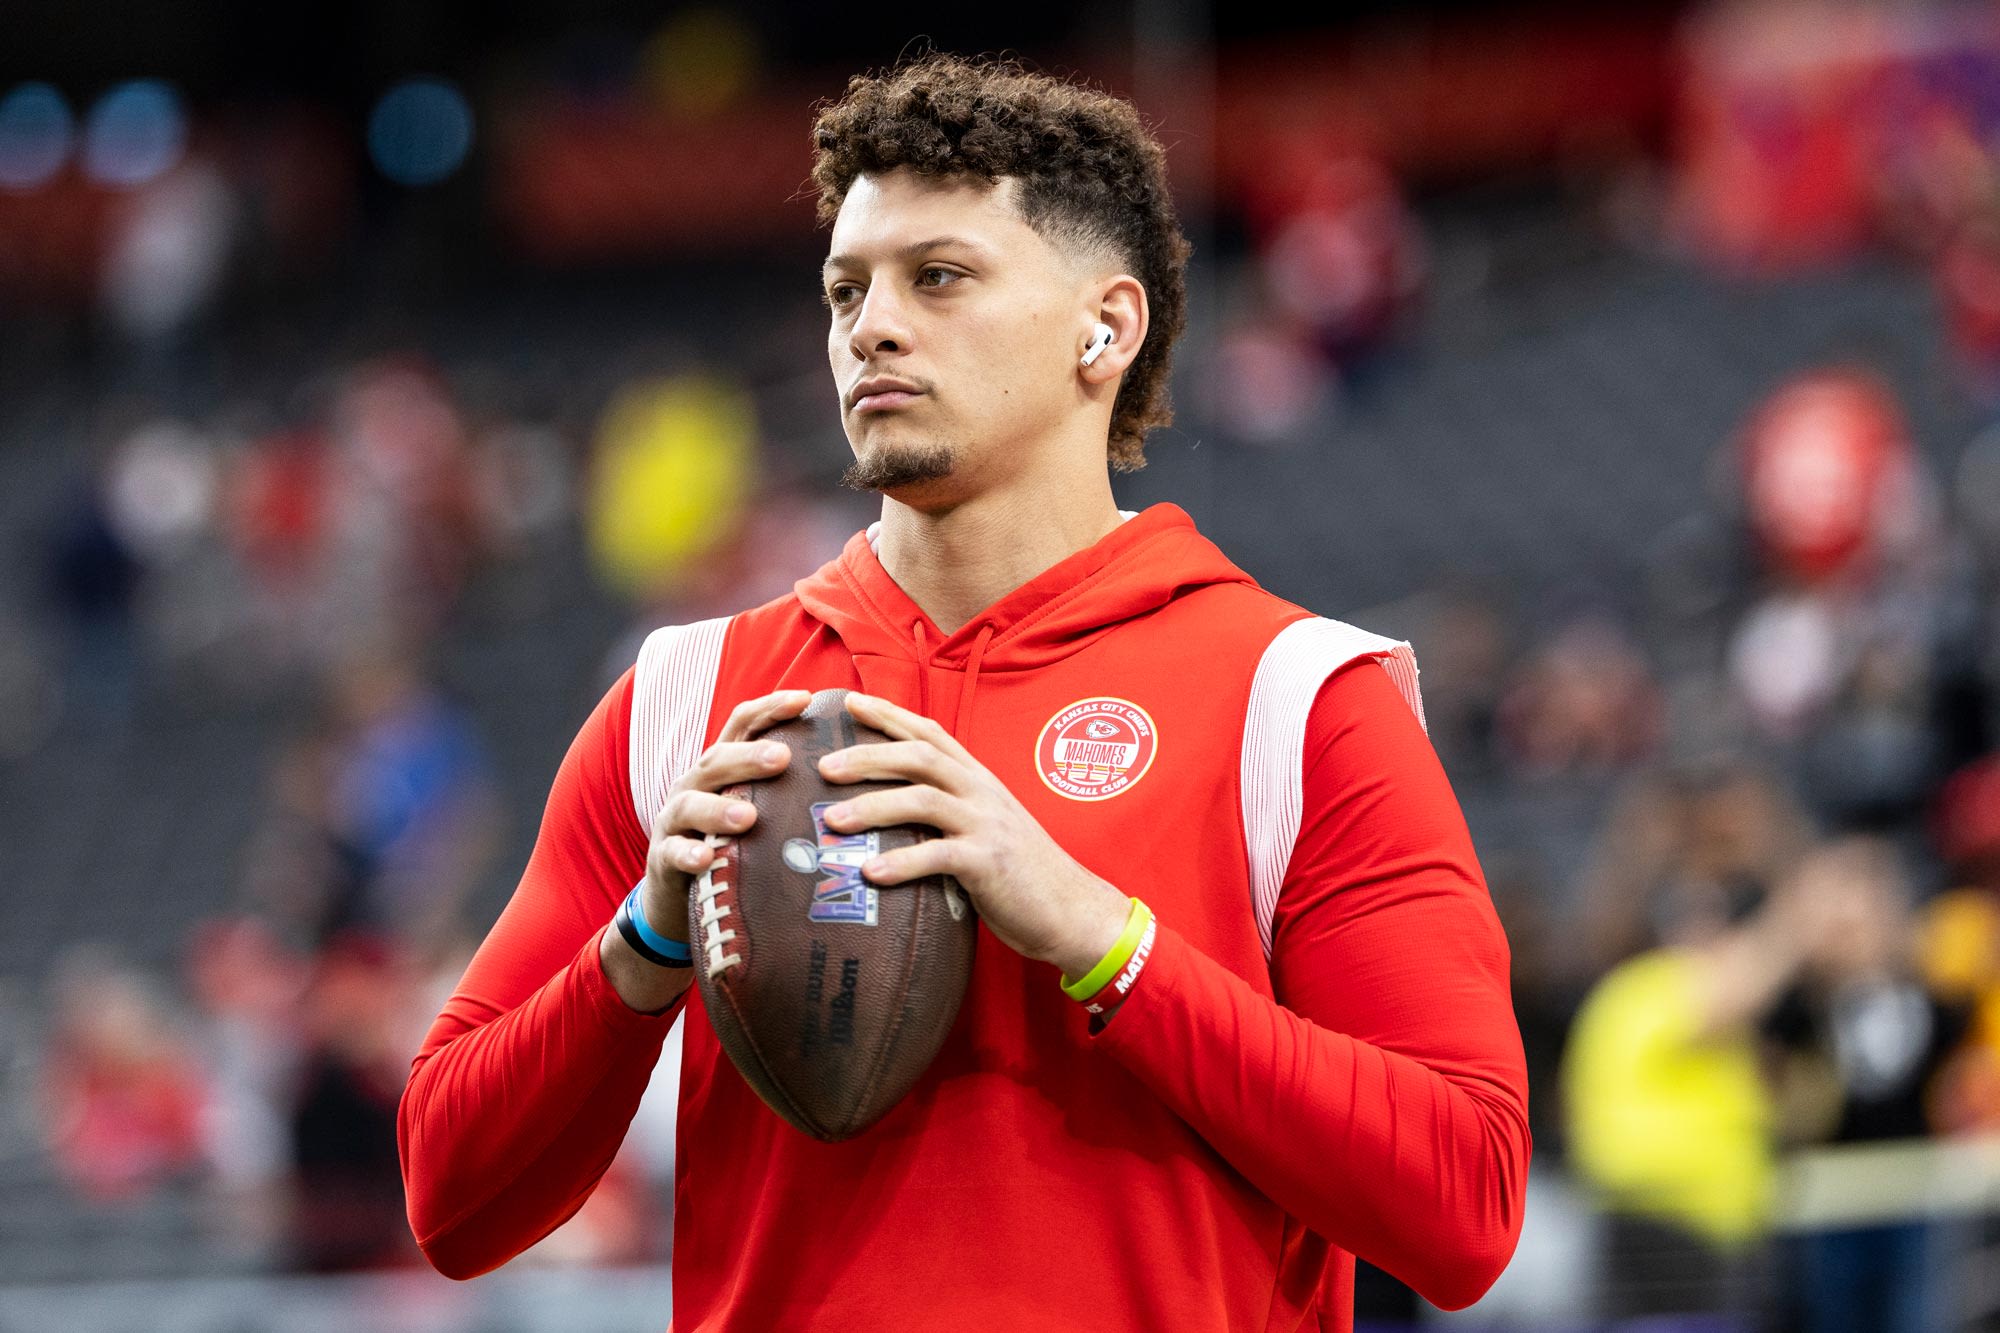 Patrick Mahomes Brushes Off Raiders Calling Him a ‘Bitch,’ Kermit Doll: ‘It’ll Get Handled’